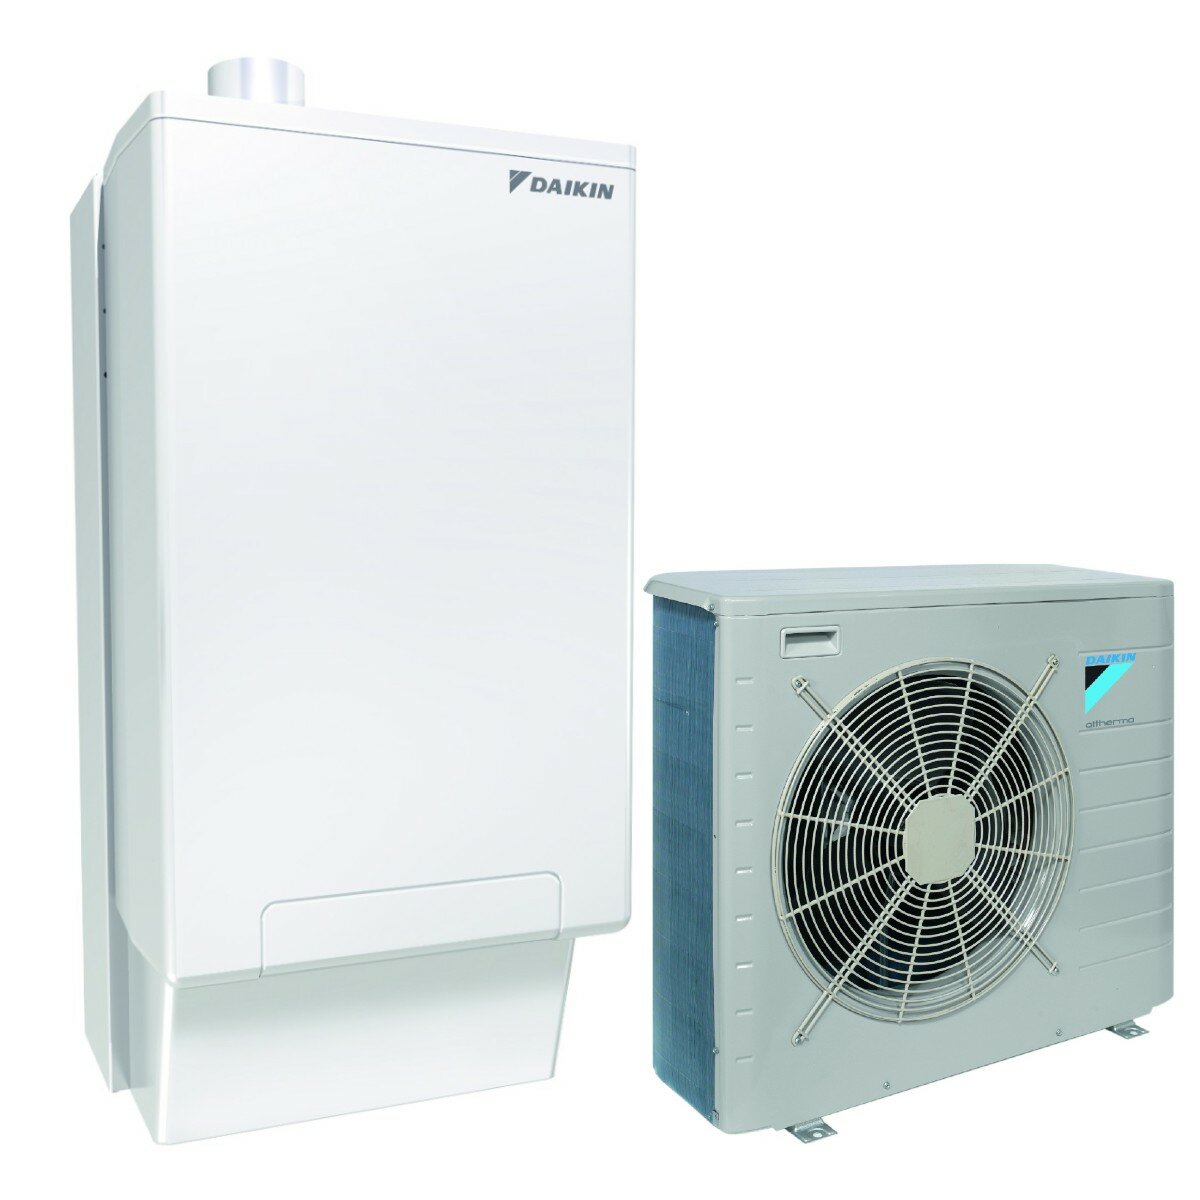 Daikin Altherma R Hybrid 8 kW A++ condensing boiler and heat pump hybrid system